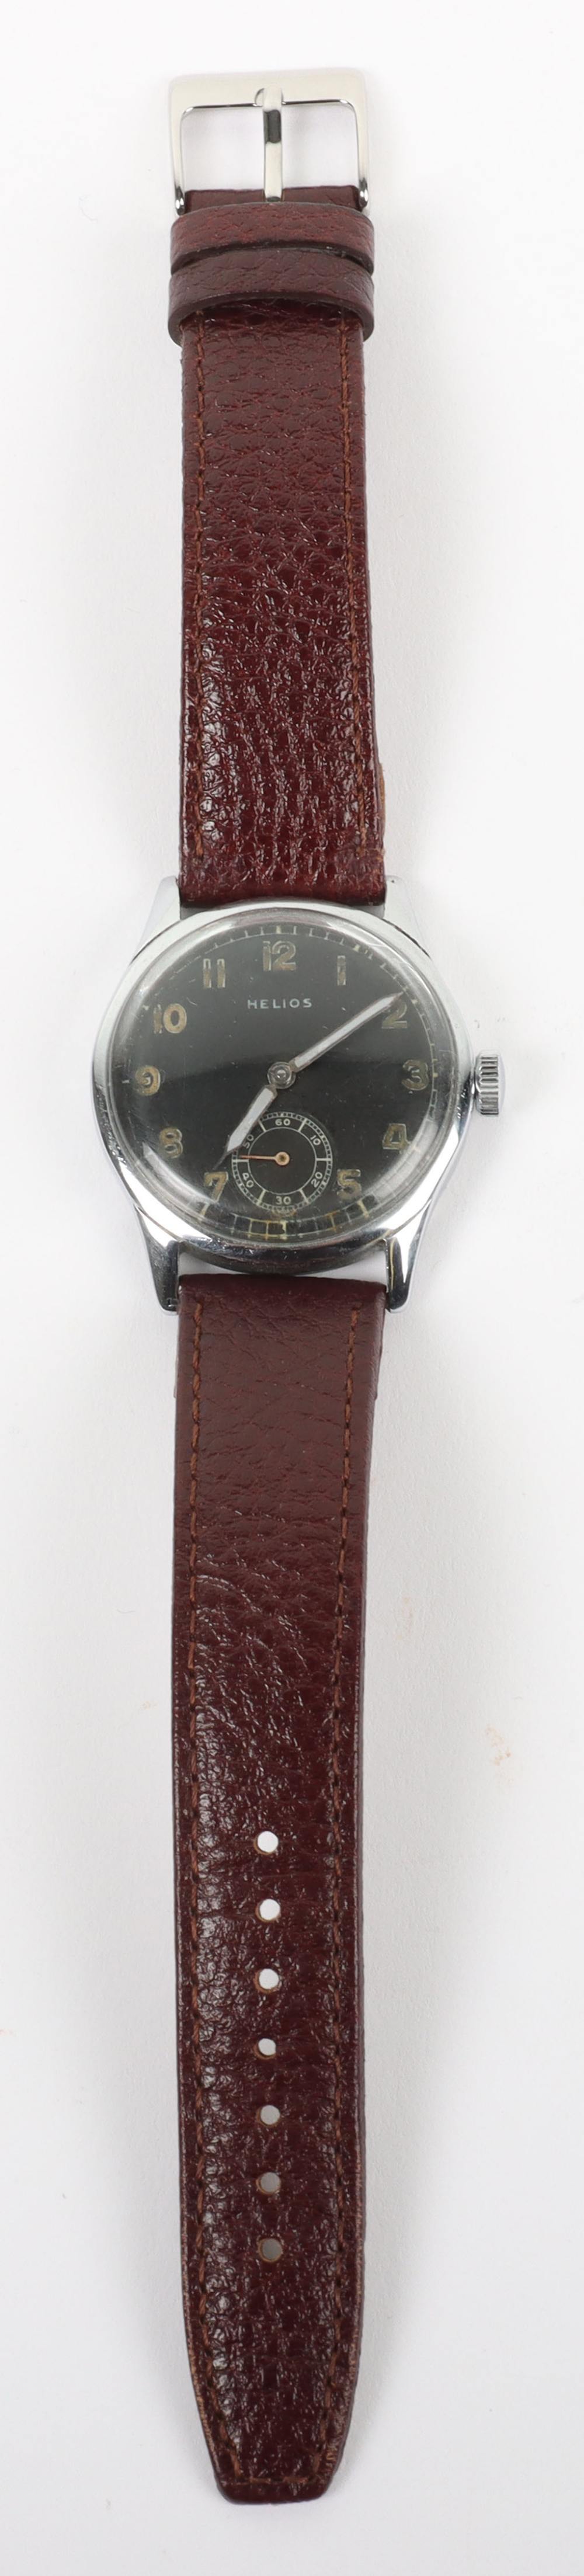 A German DH military wristwatch by Helios